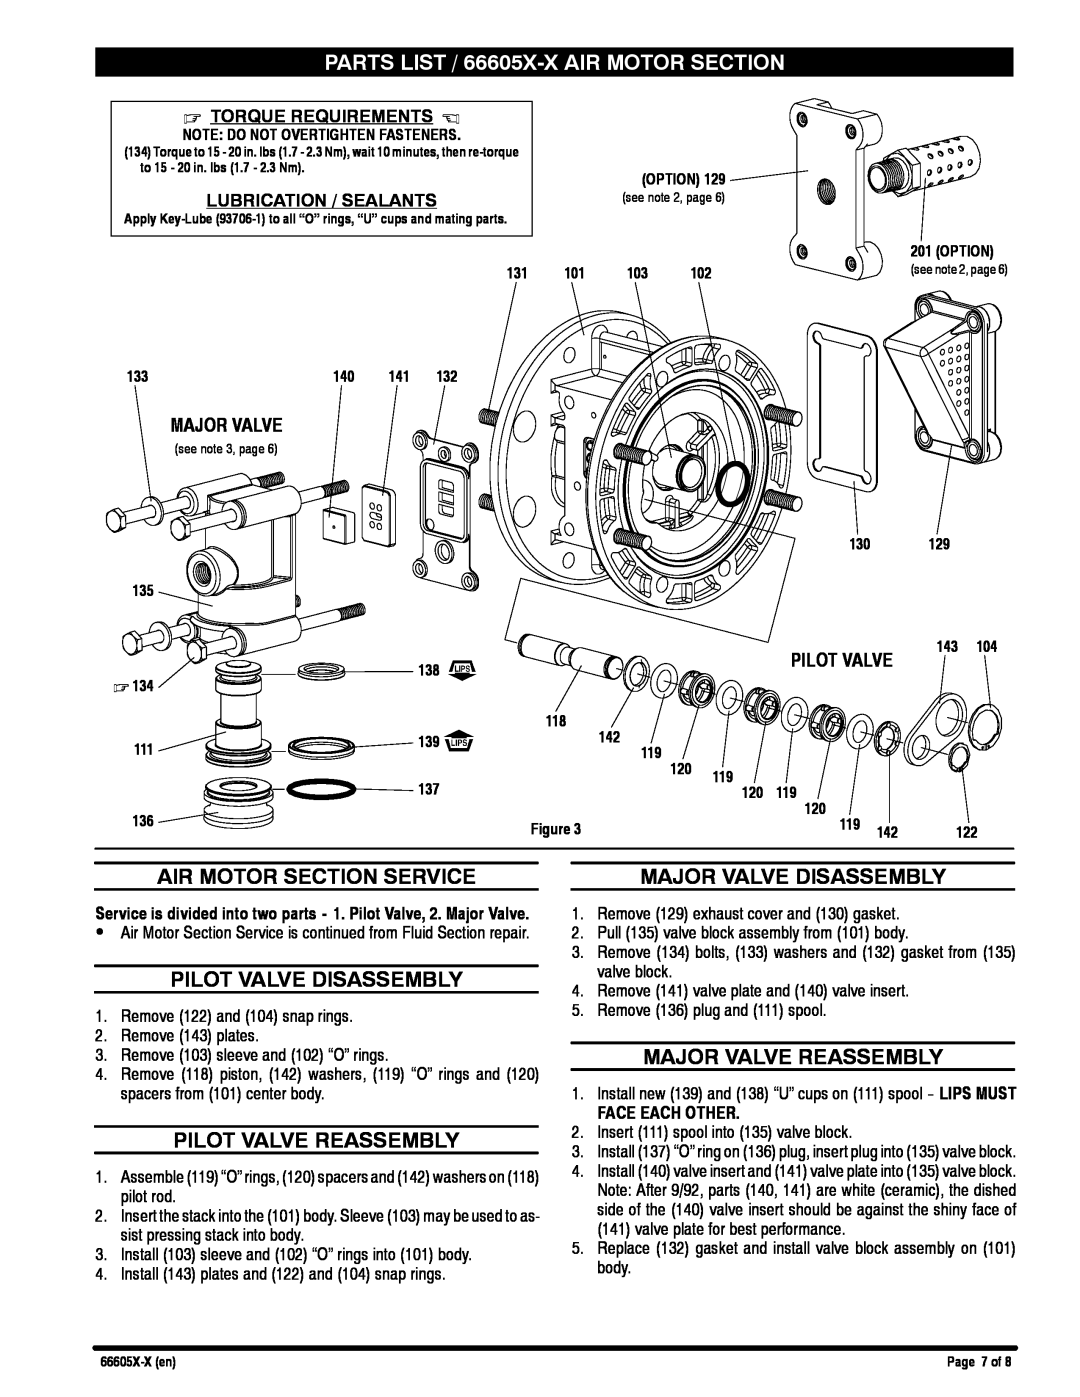 Ingersoll-Rand 66605X-X Air Motor Section Service, Pilot Valve Disassembly, Pilot Valve Reassembly, Major Valve Reassembly 